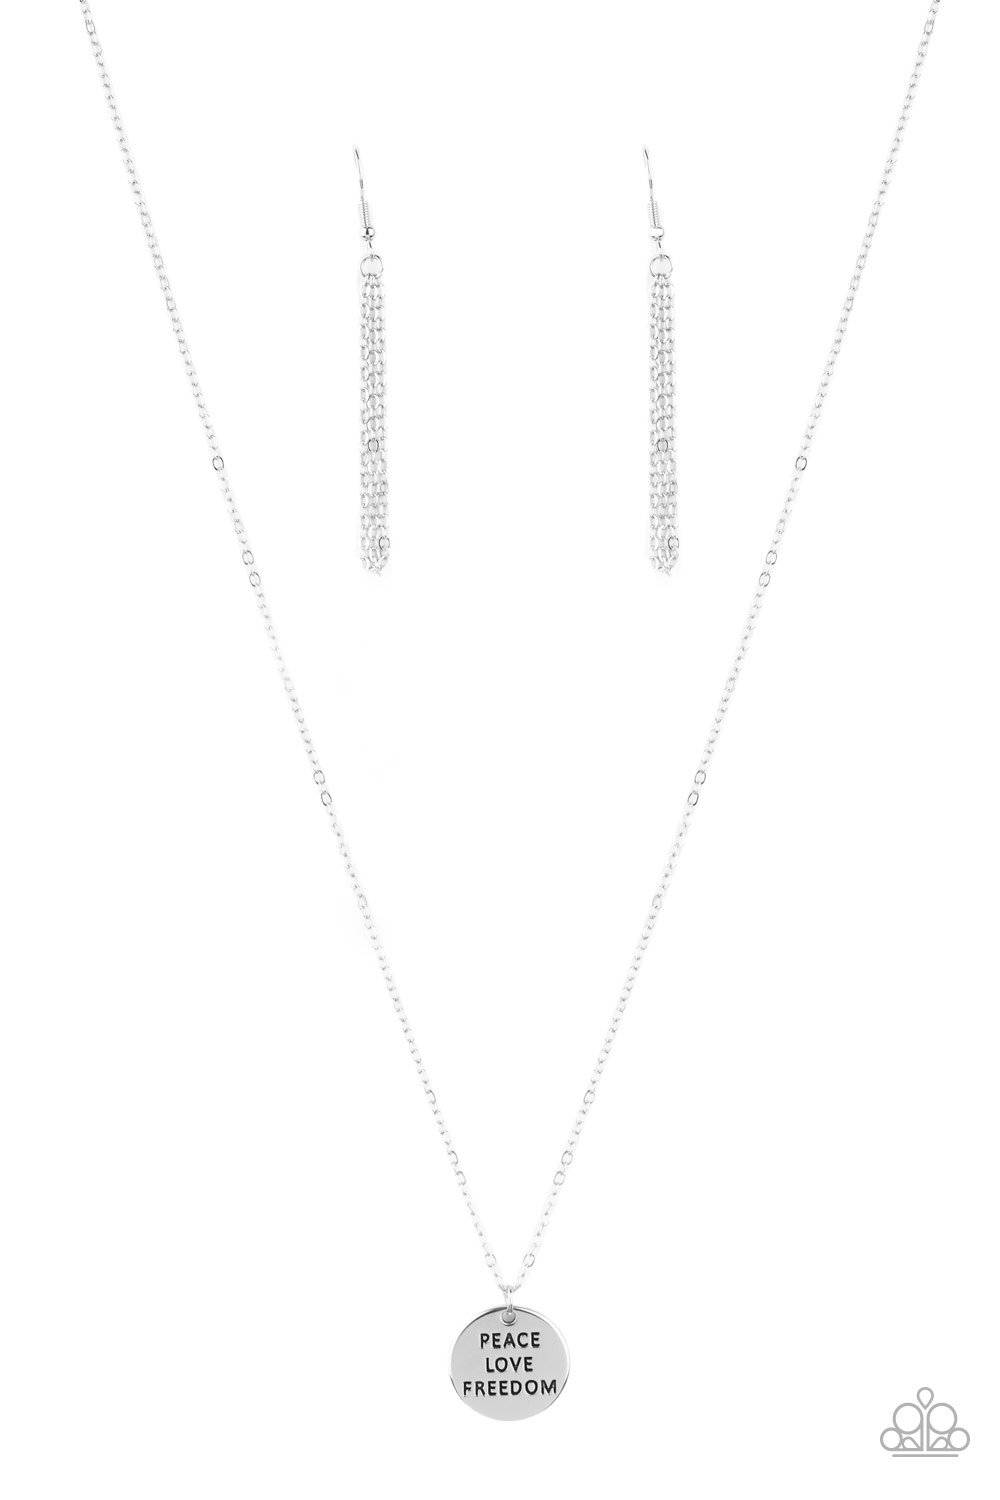 A256 - Freedom Isn't Free Silver Necklace by Paparazzi Accessories on Fancy5Fashion.com